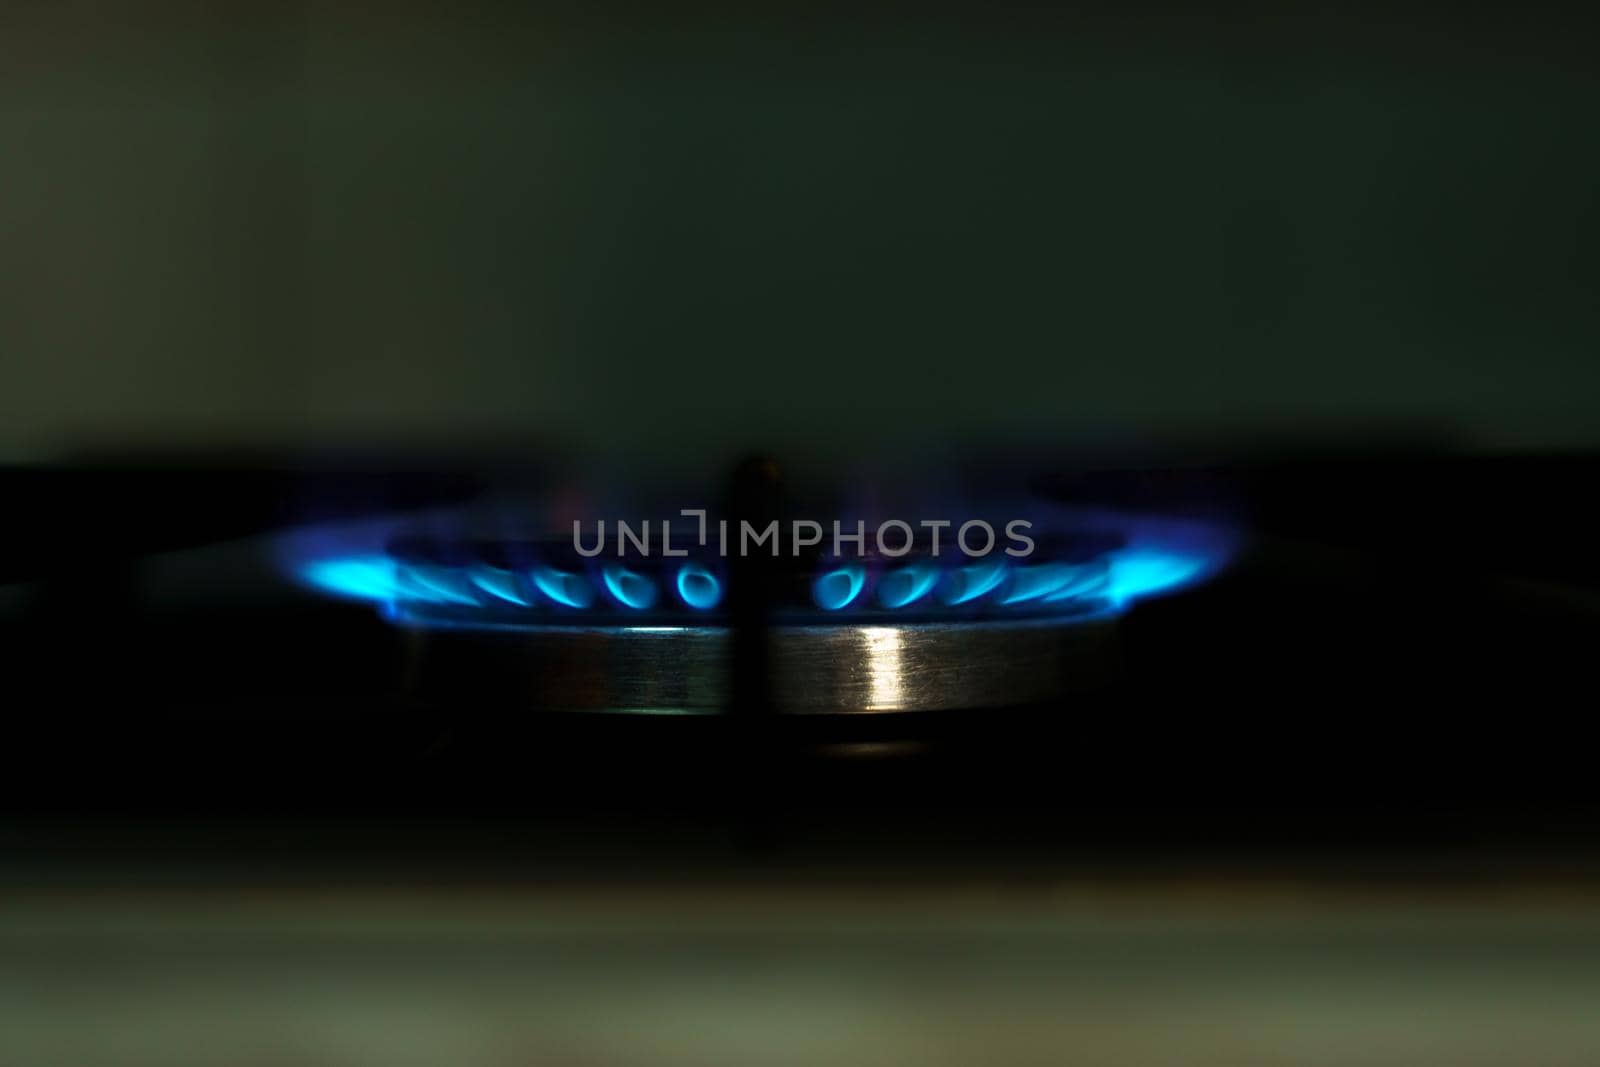 close-up of the flame of a butane stove with black background